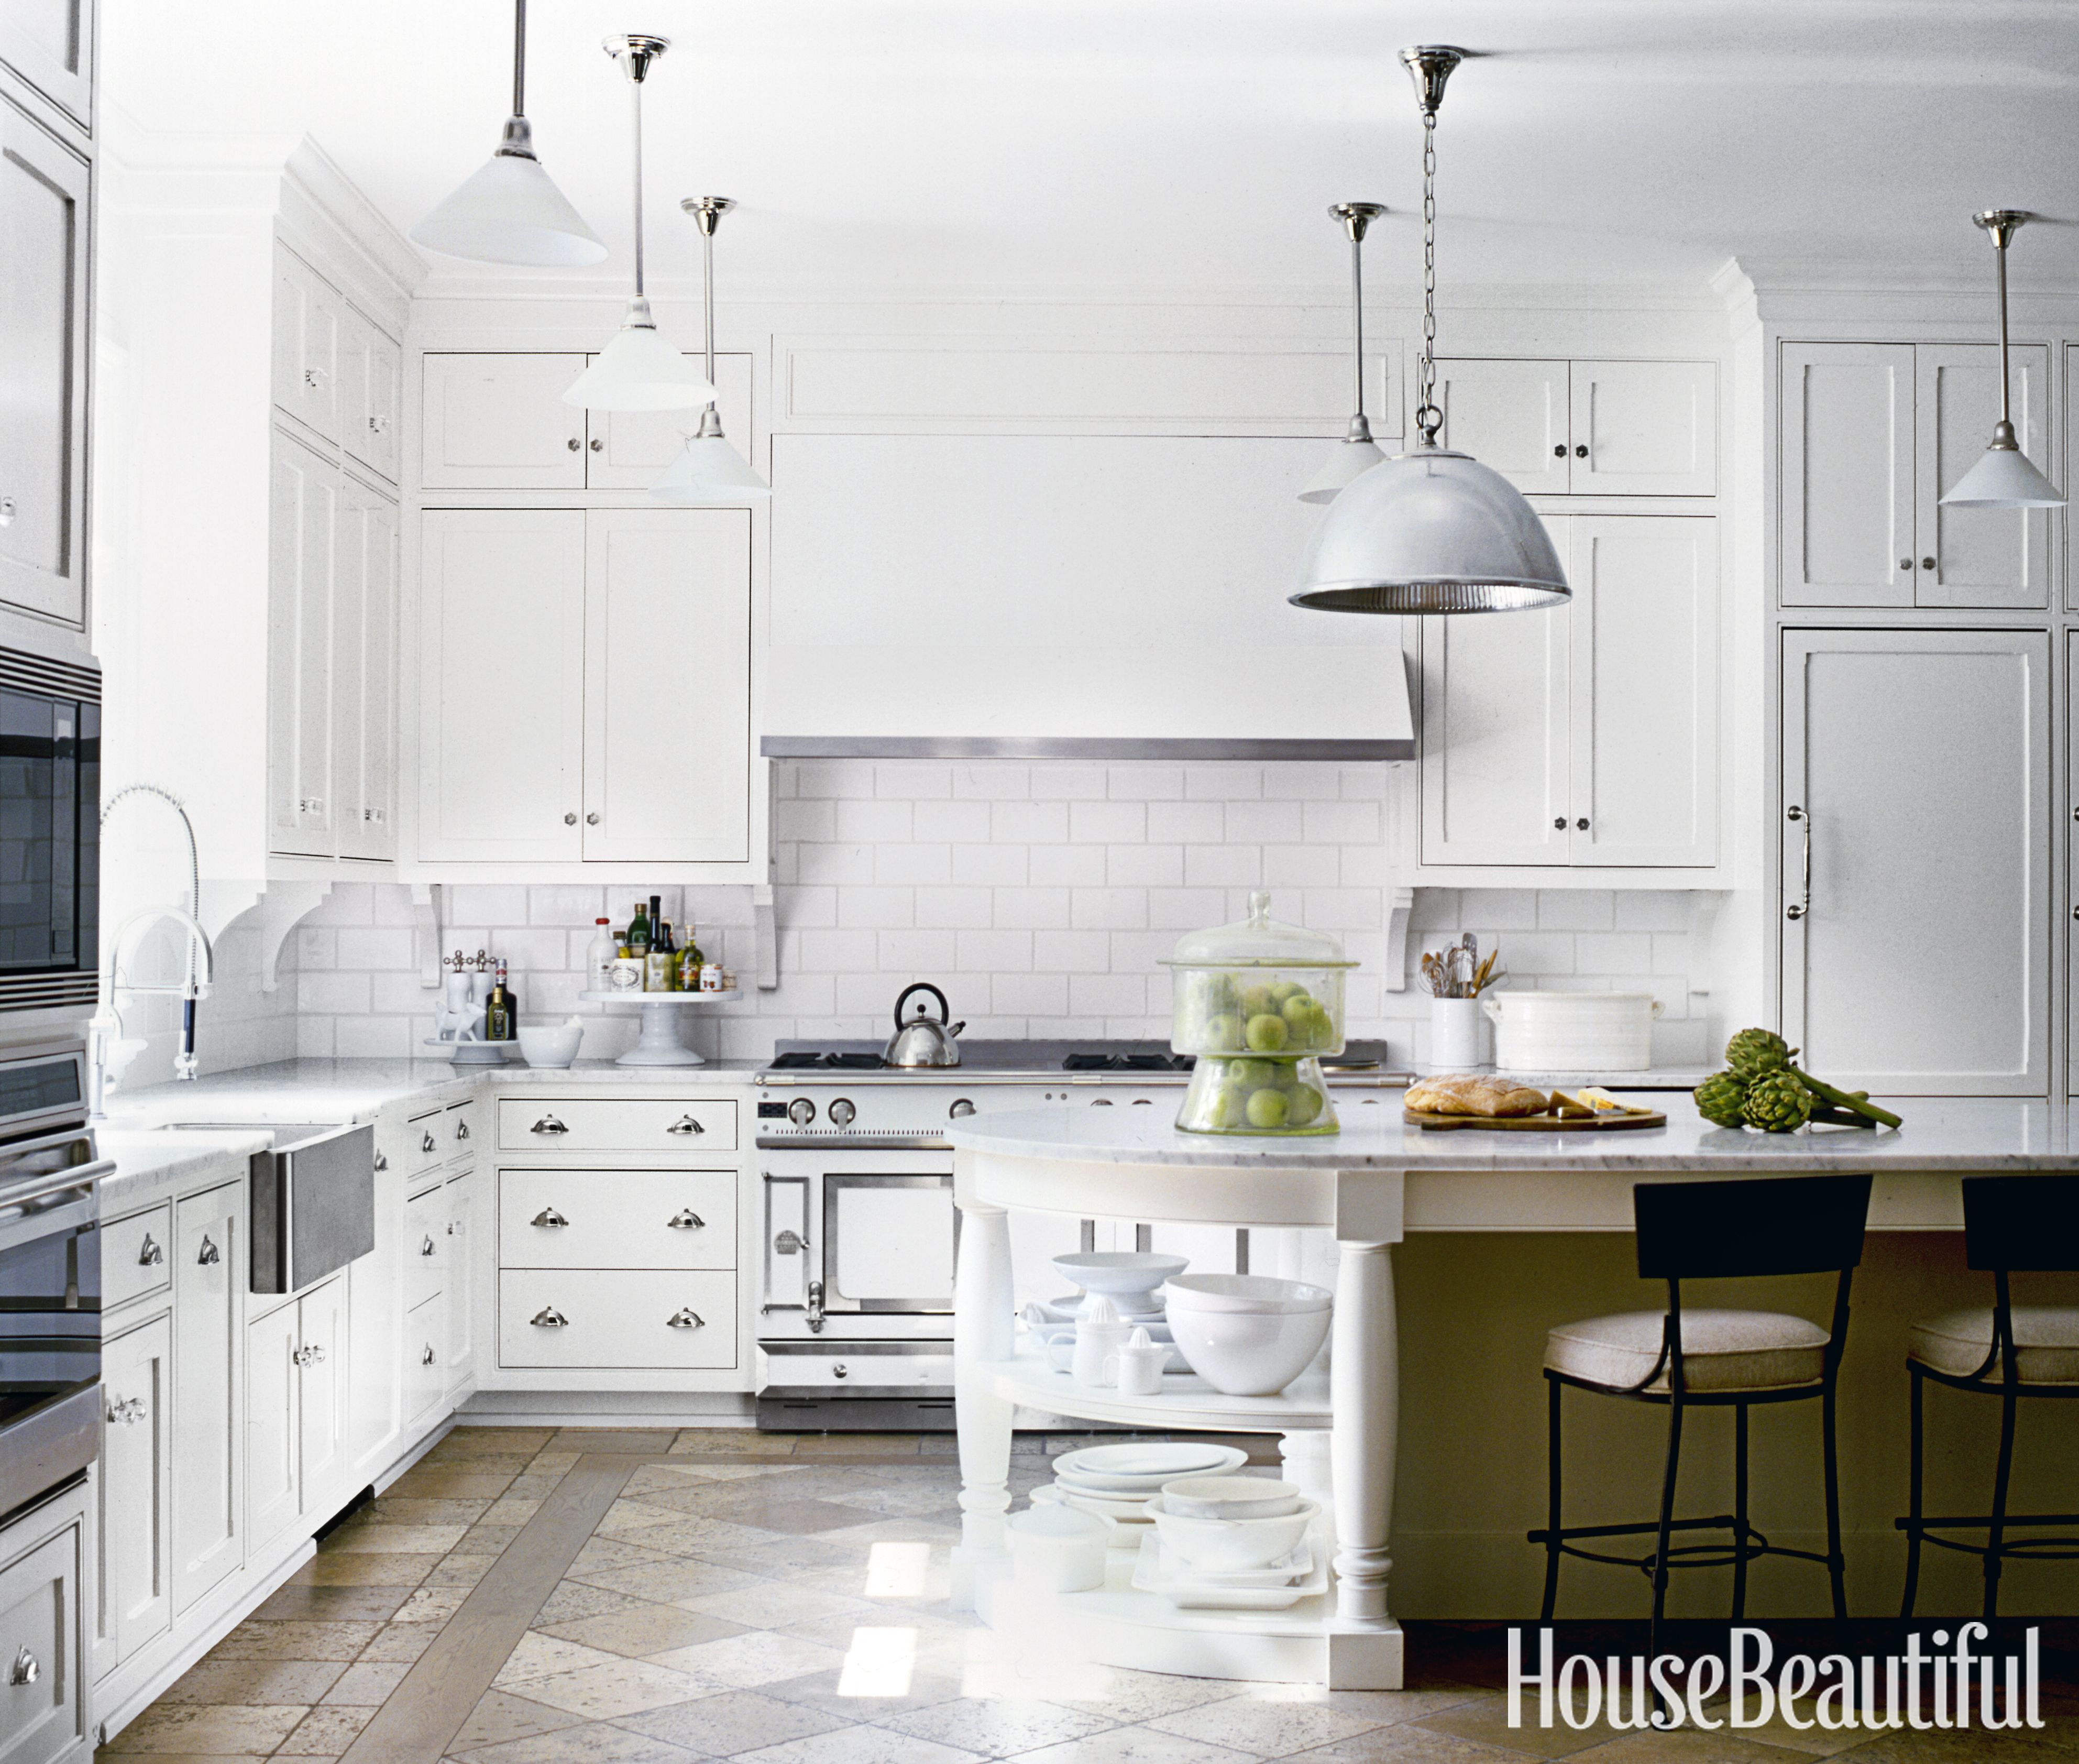 How To Make Your Kitchen Look Expensive, How To Make Your Kitchen Cabinets Look New Again